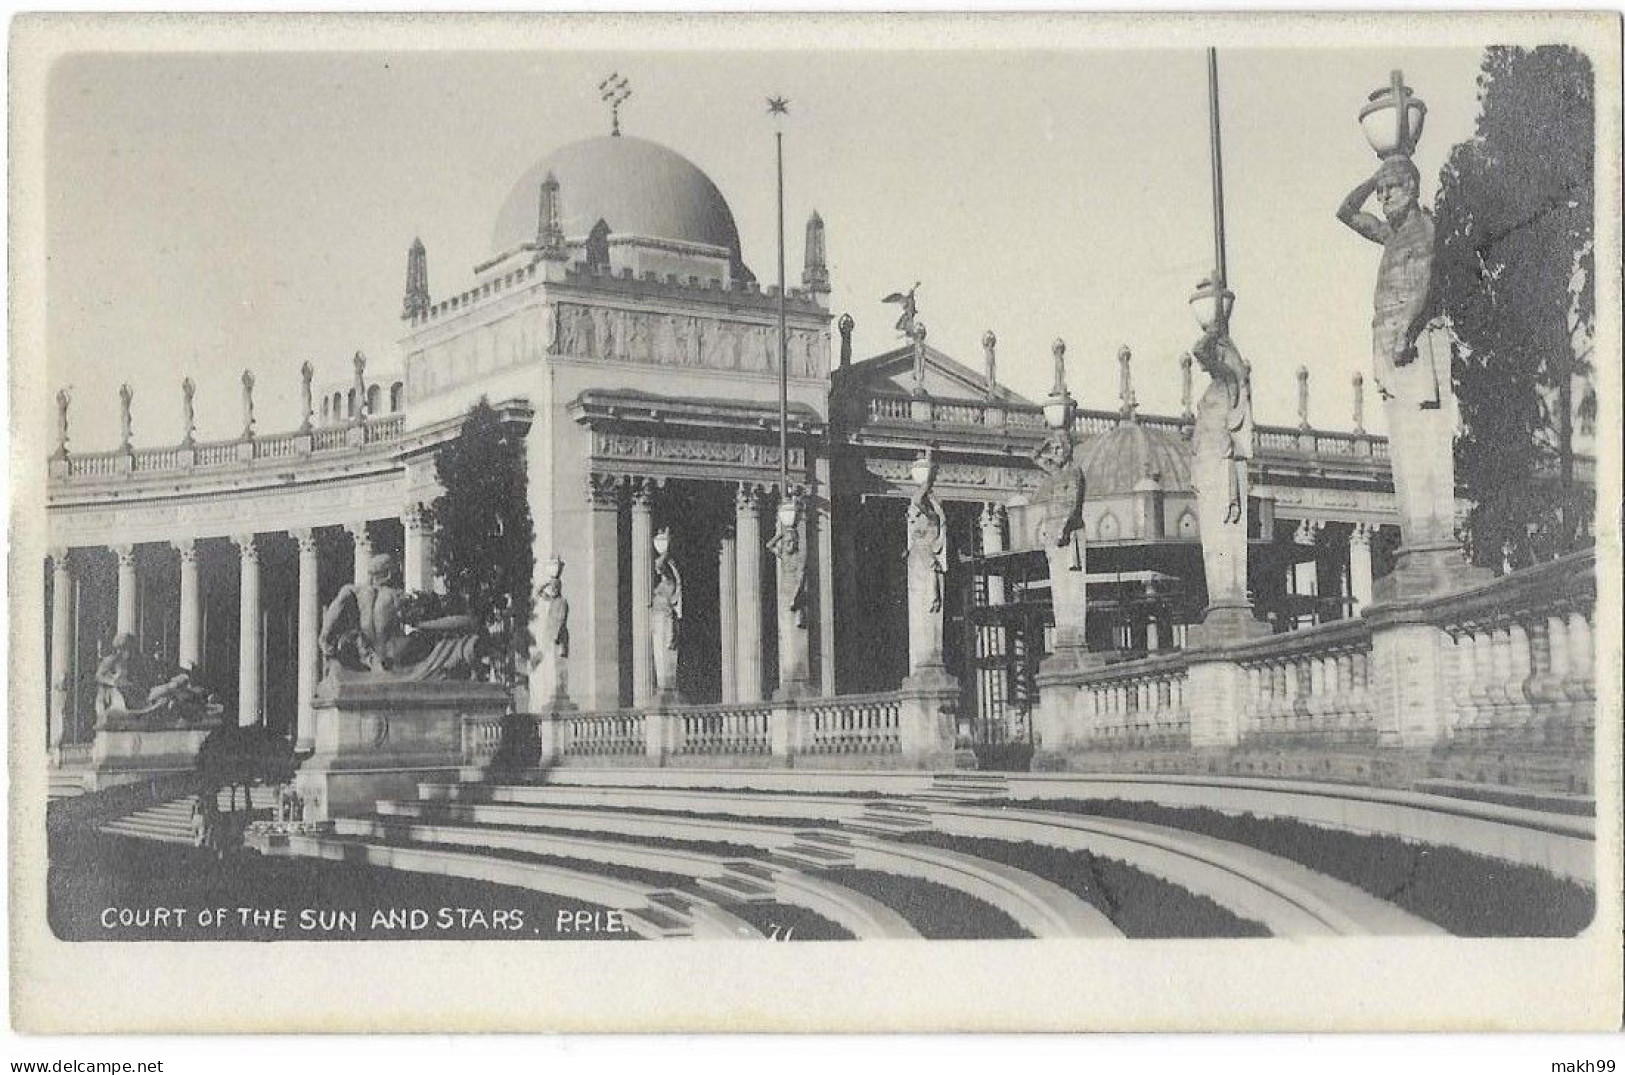 Panama-Pacific International Exposition, 1915 - Court Of The Sun And Stars, San Francisco, CA - Real Photo PC (RPPC) - San Francisco